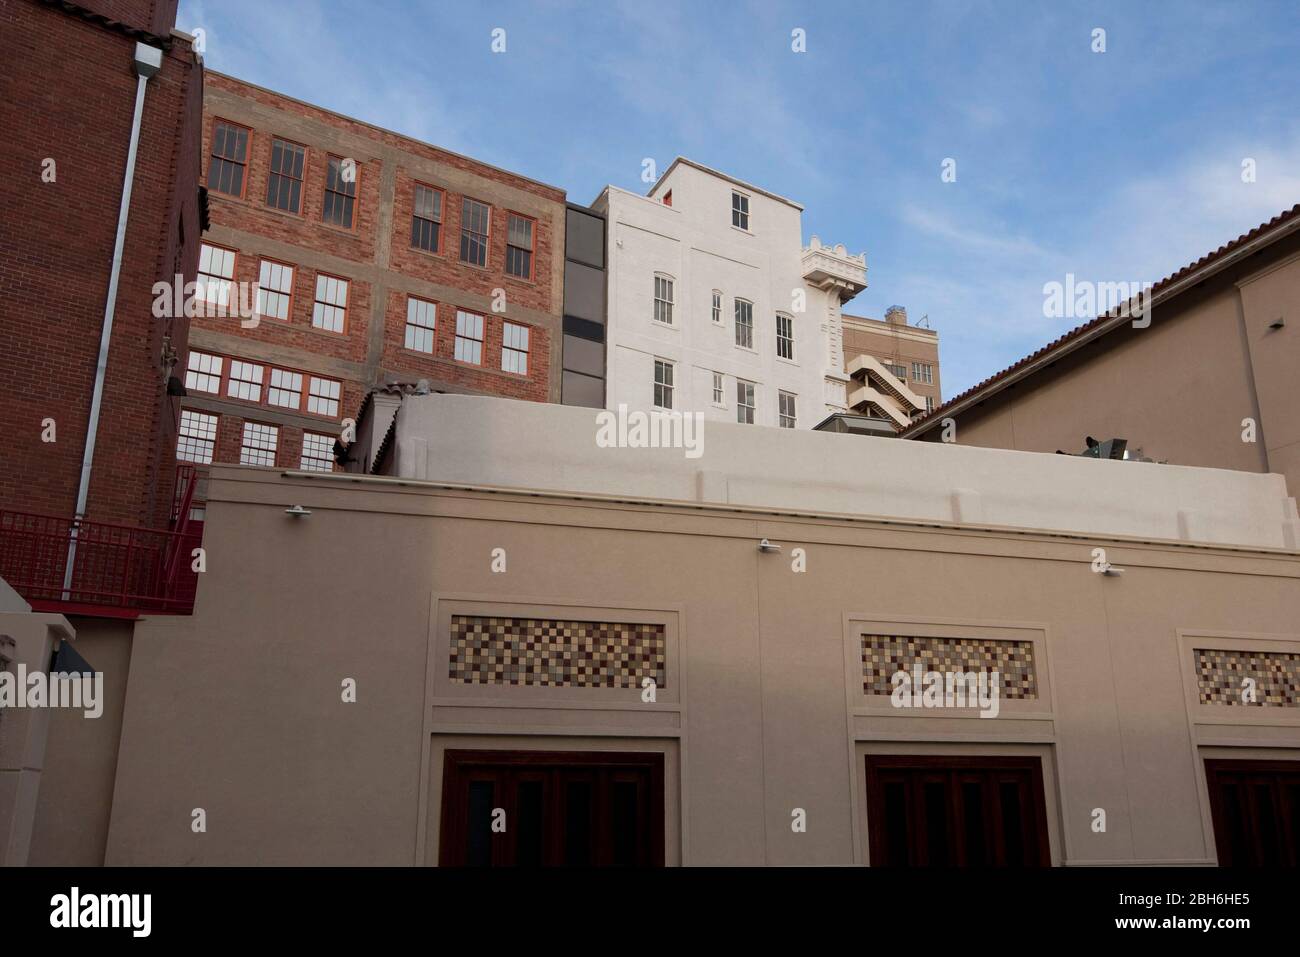 El Paso, Texas May 14, 2009: Scenes from the arts district downtown El Paso, TX showing a portion of the Plaza Theater's 1930-era complex (foreground) with older buildings behind.  ©Bob Daemmrich Stock Photo